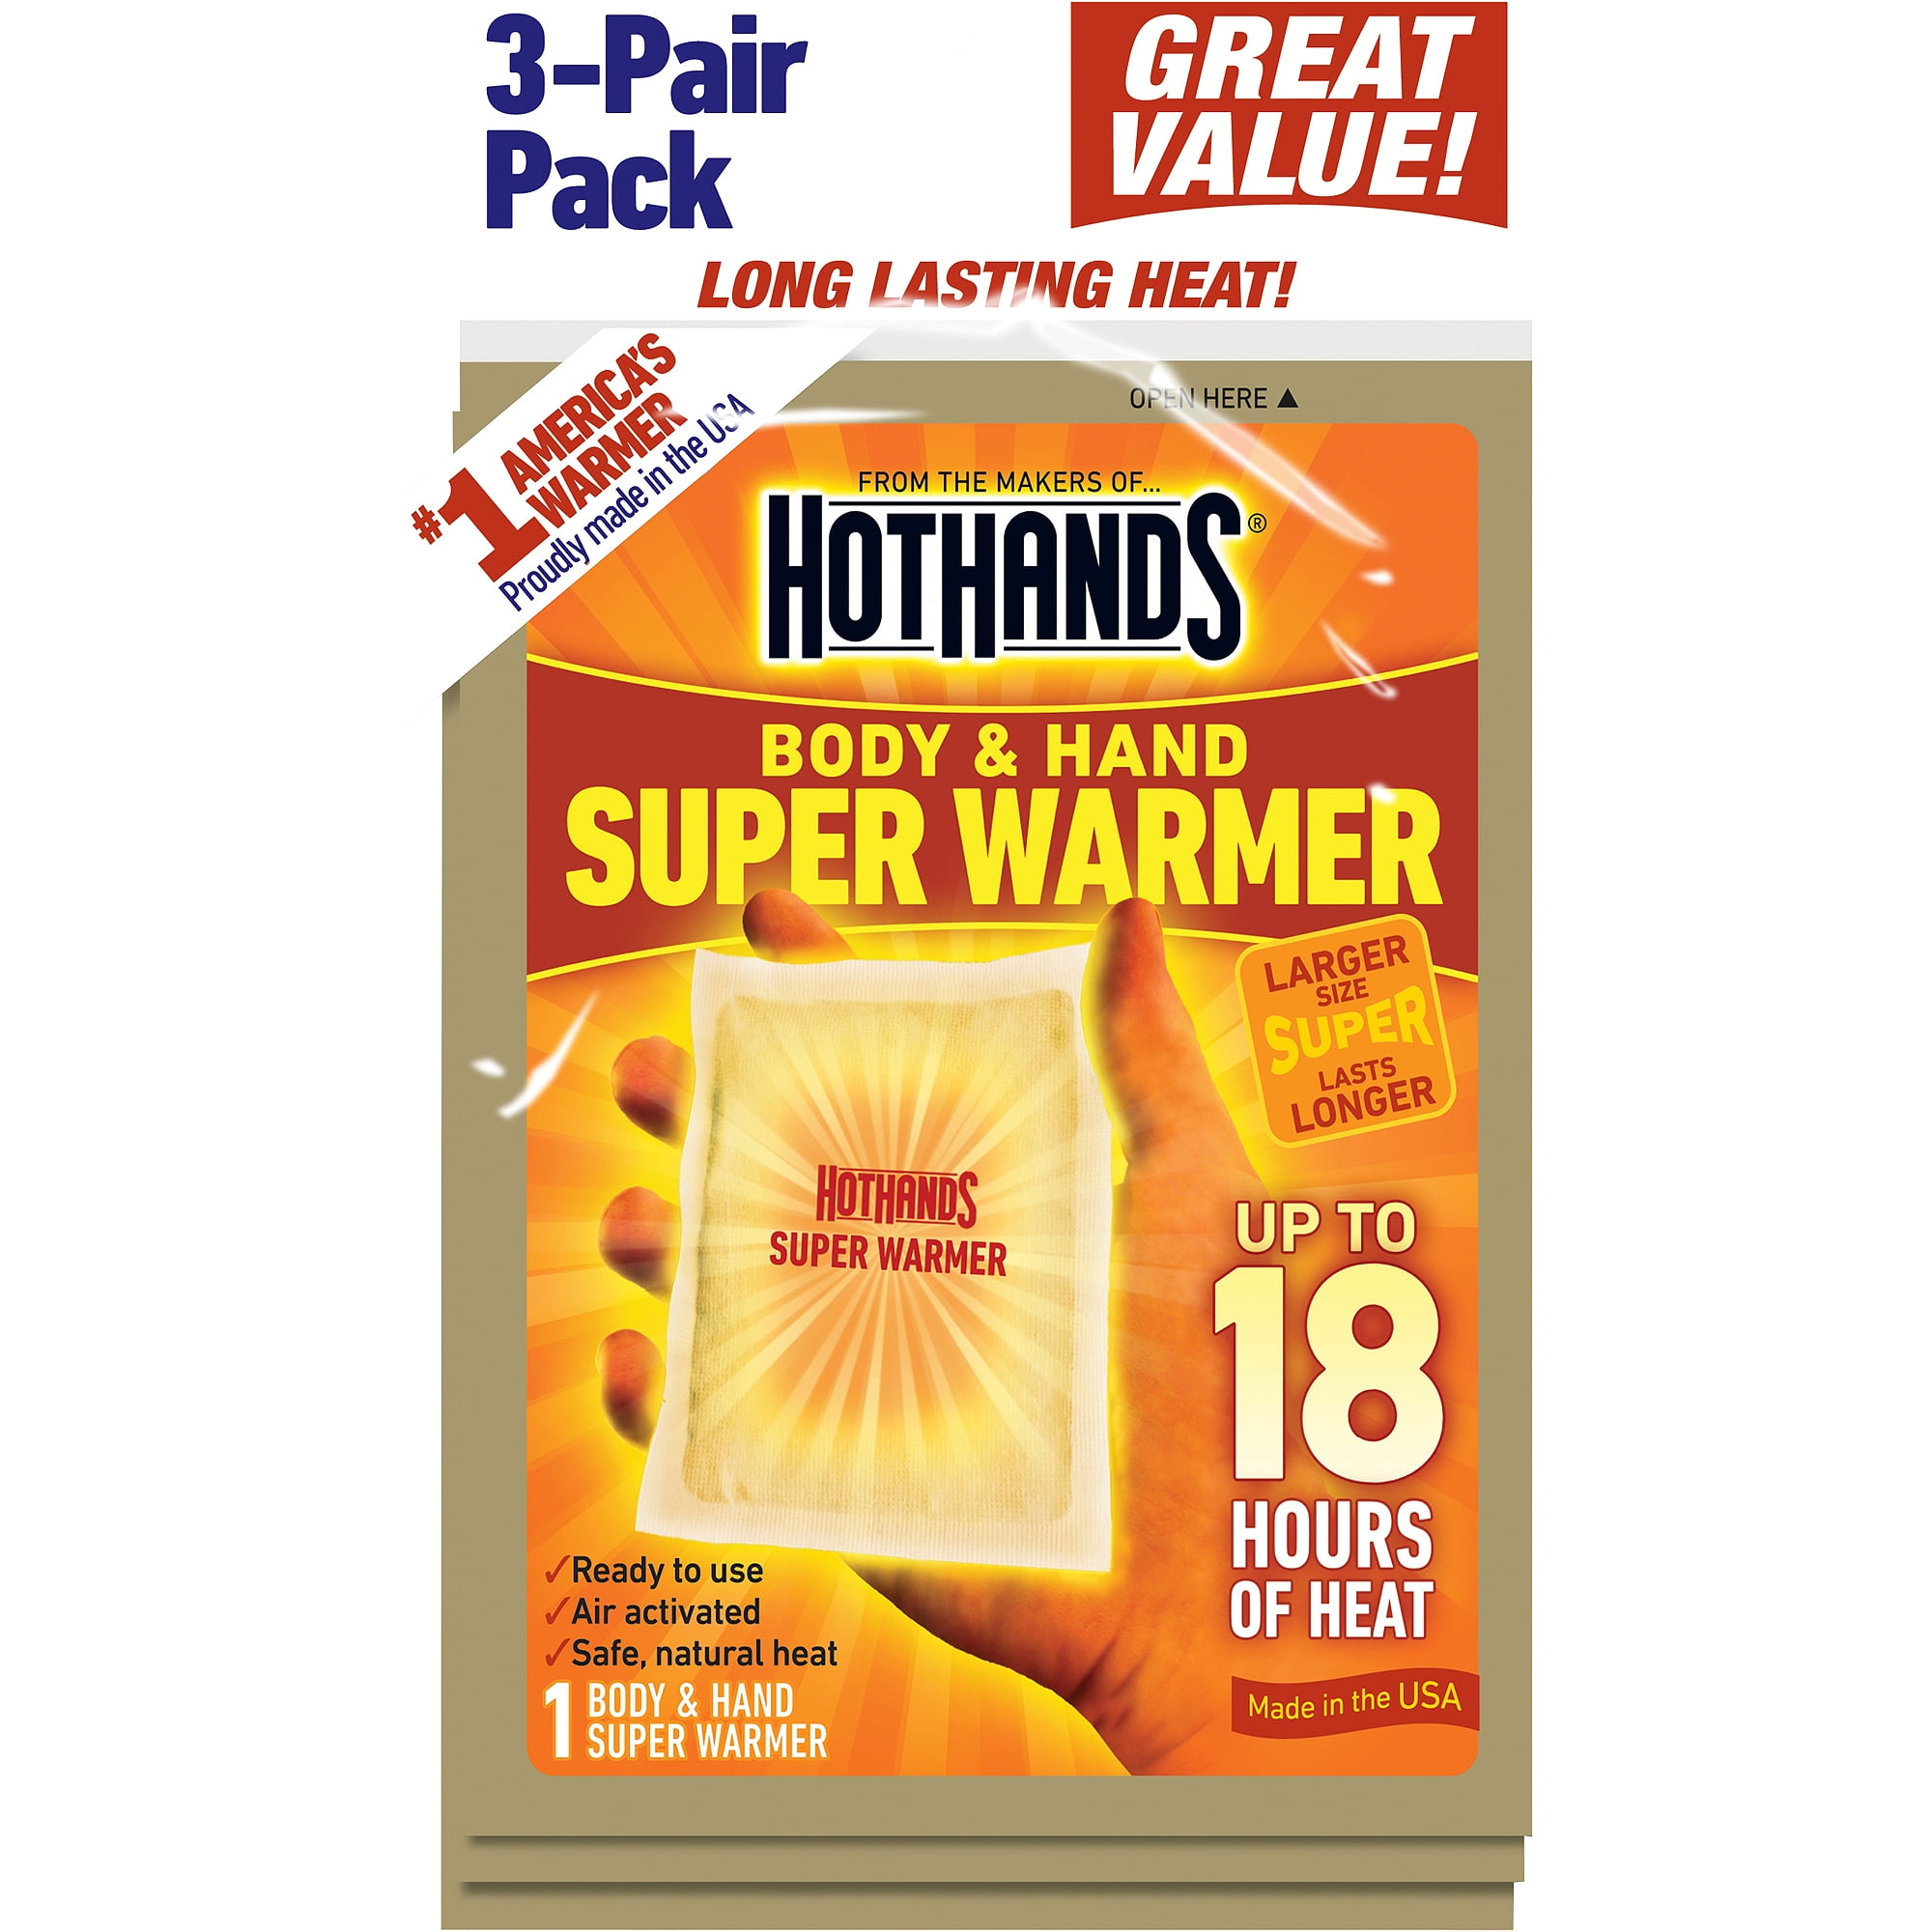 HotHands Hand Warmers 1 2 5 8 10 20 32 40 Pairs Safe Heat Exp 6-23 FREE SHIP 